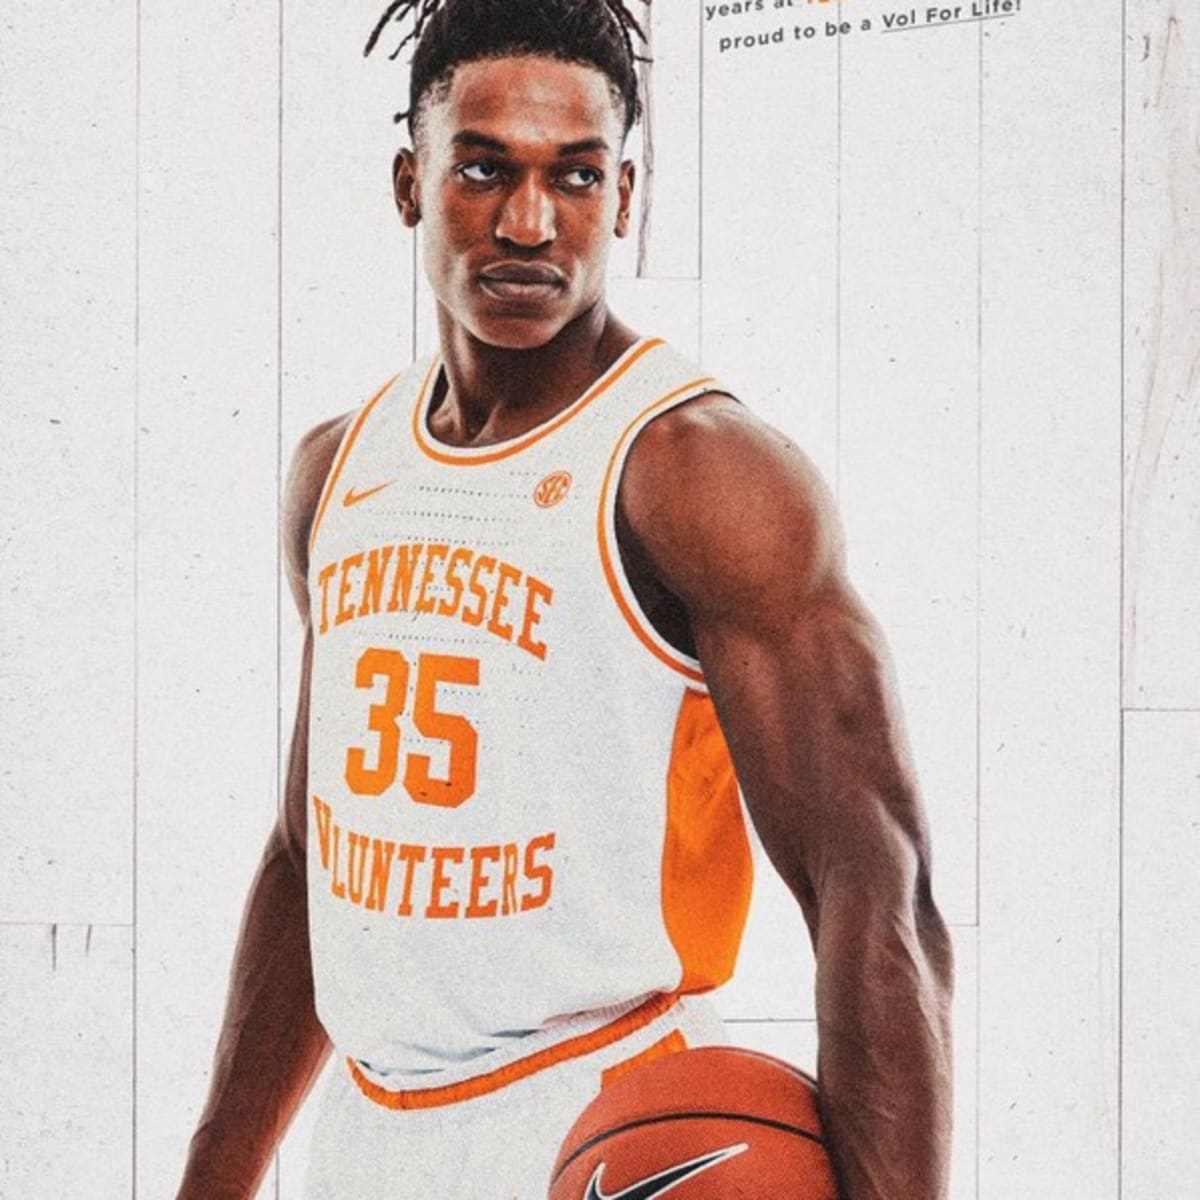 Yves Pons Is Returning Home To Continue Basketball Career